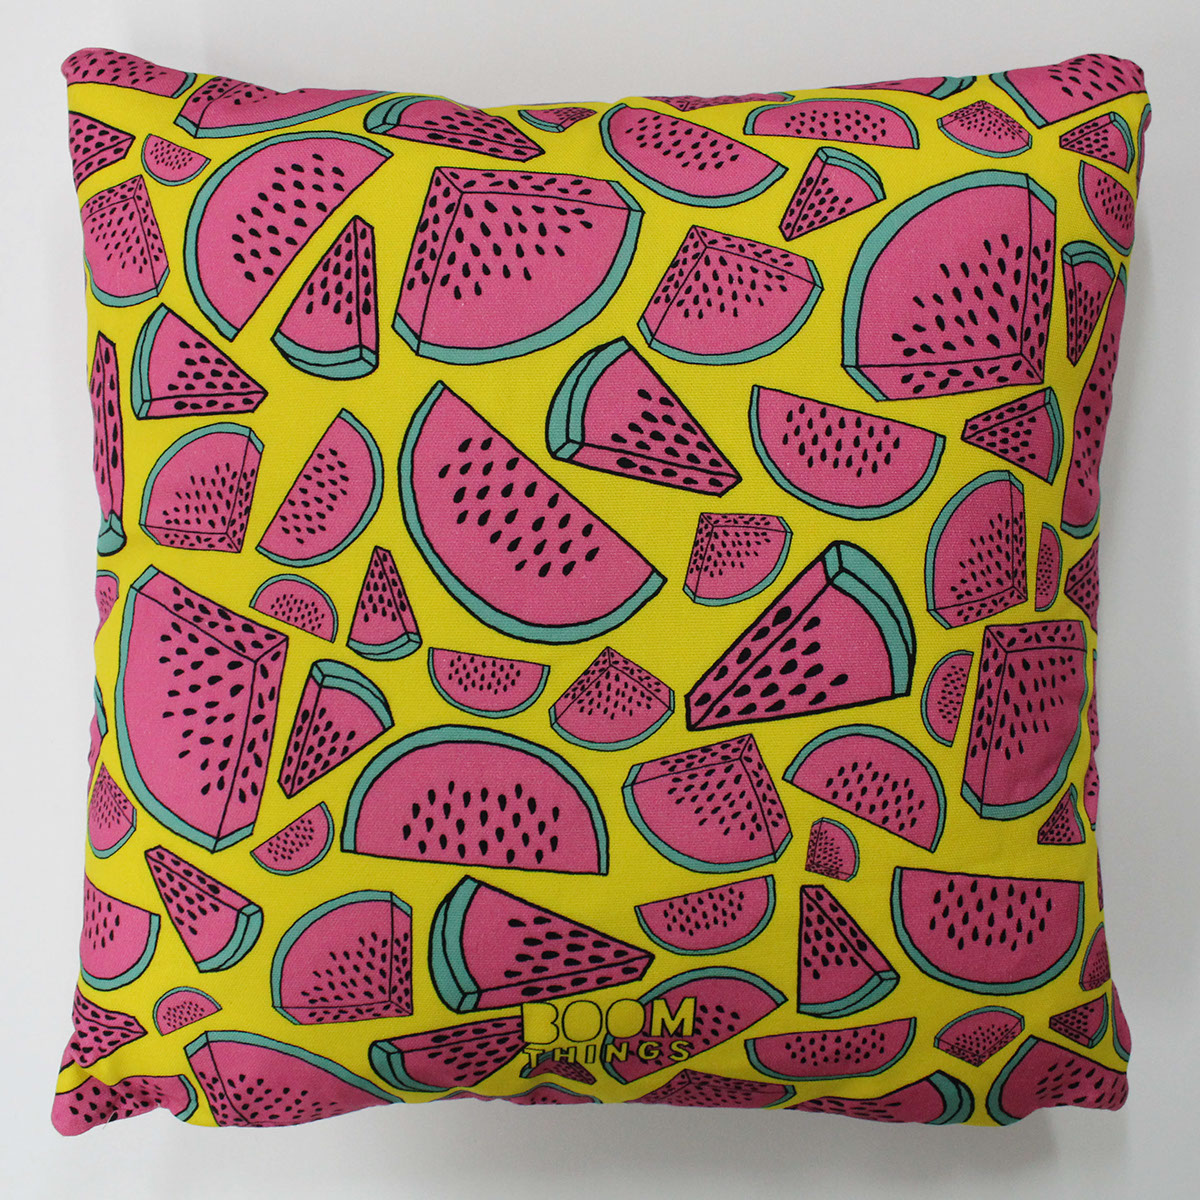 Fruit colour pattern line drawing intricate Intricate pattern masculine design cushion Digital Printing duck down cushions Maze Design scallop design fruit cushion watermelon bright design